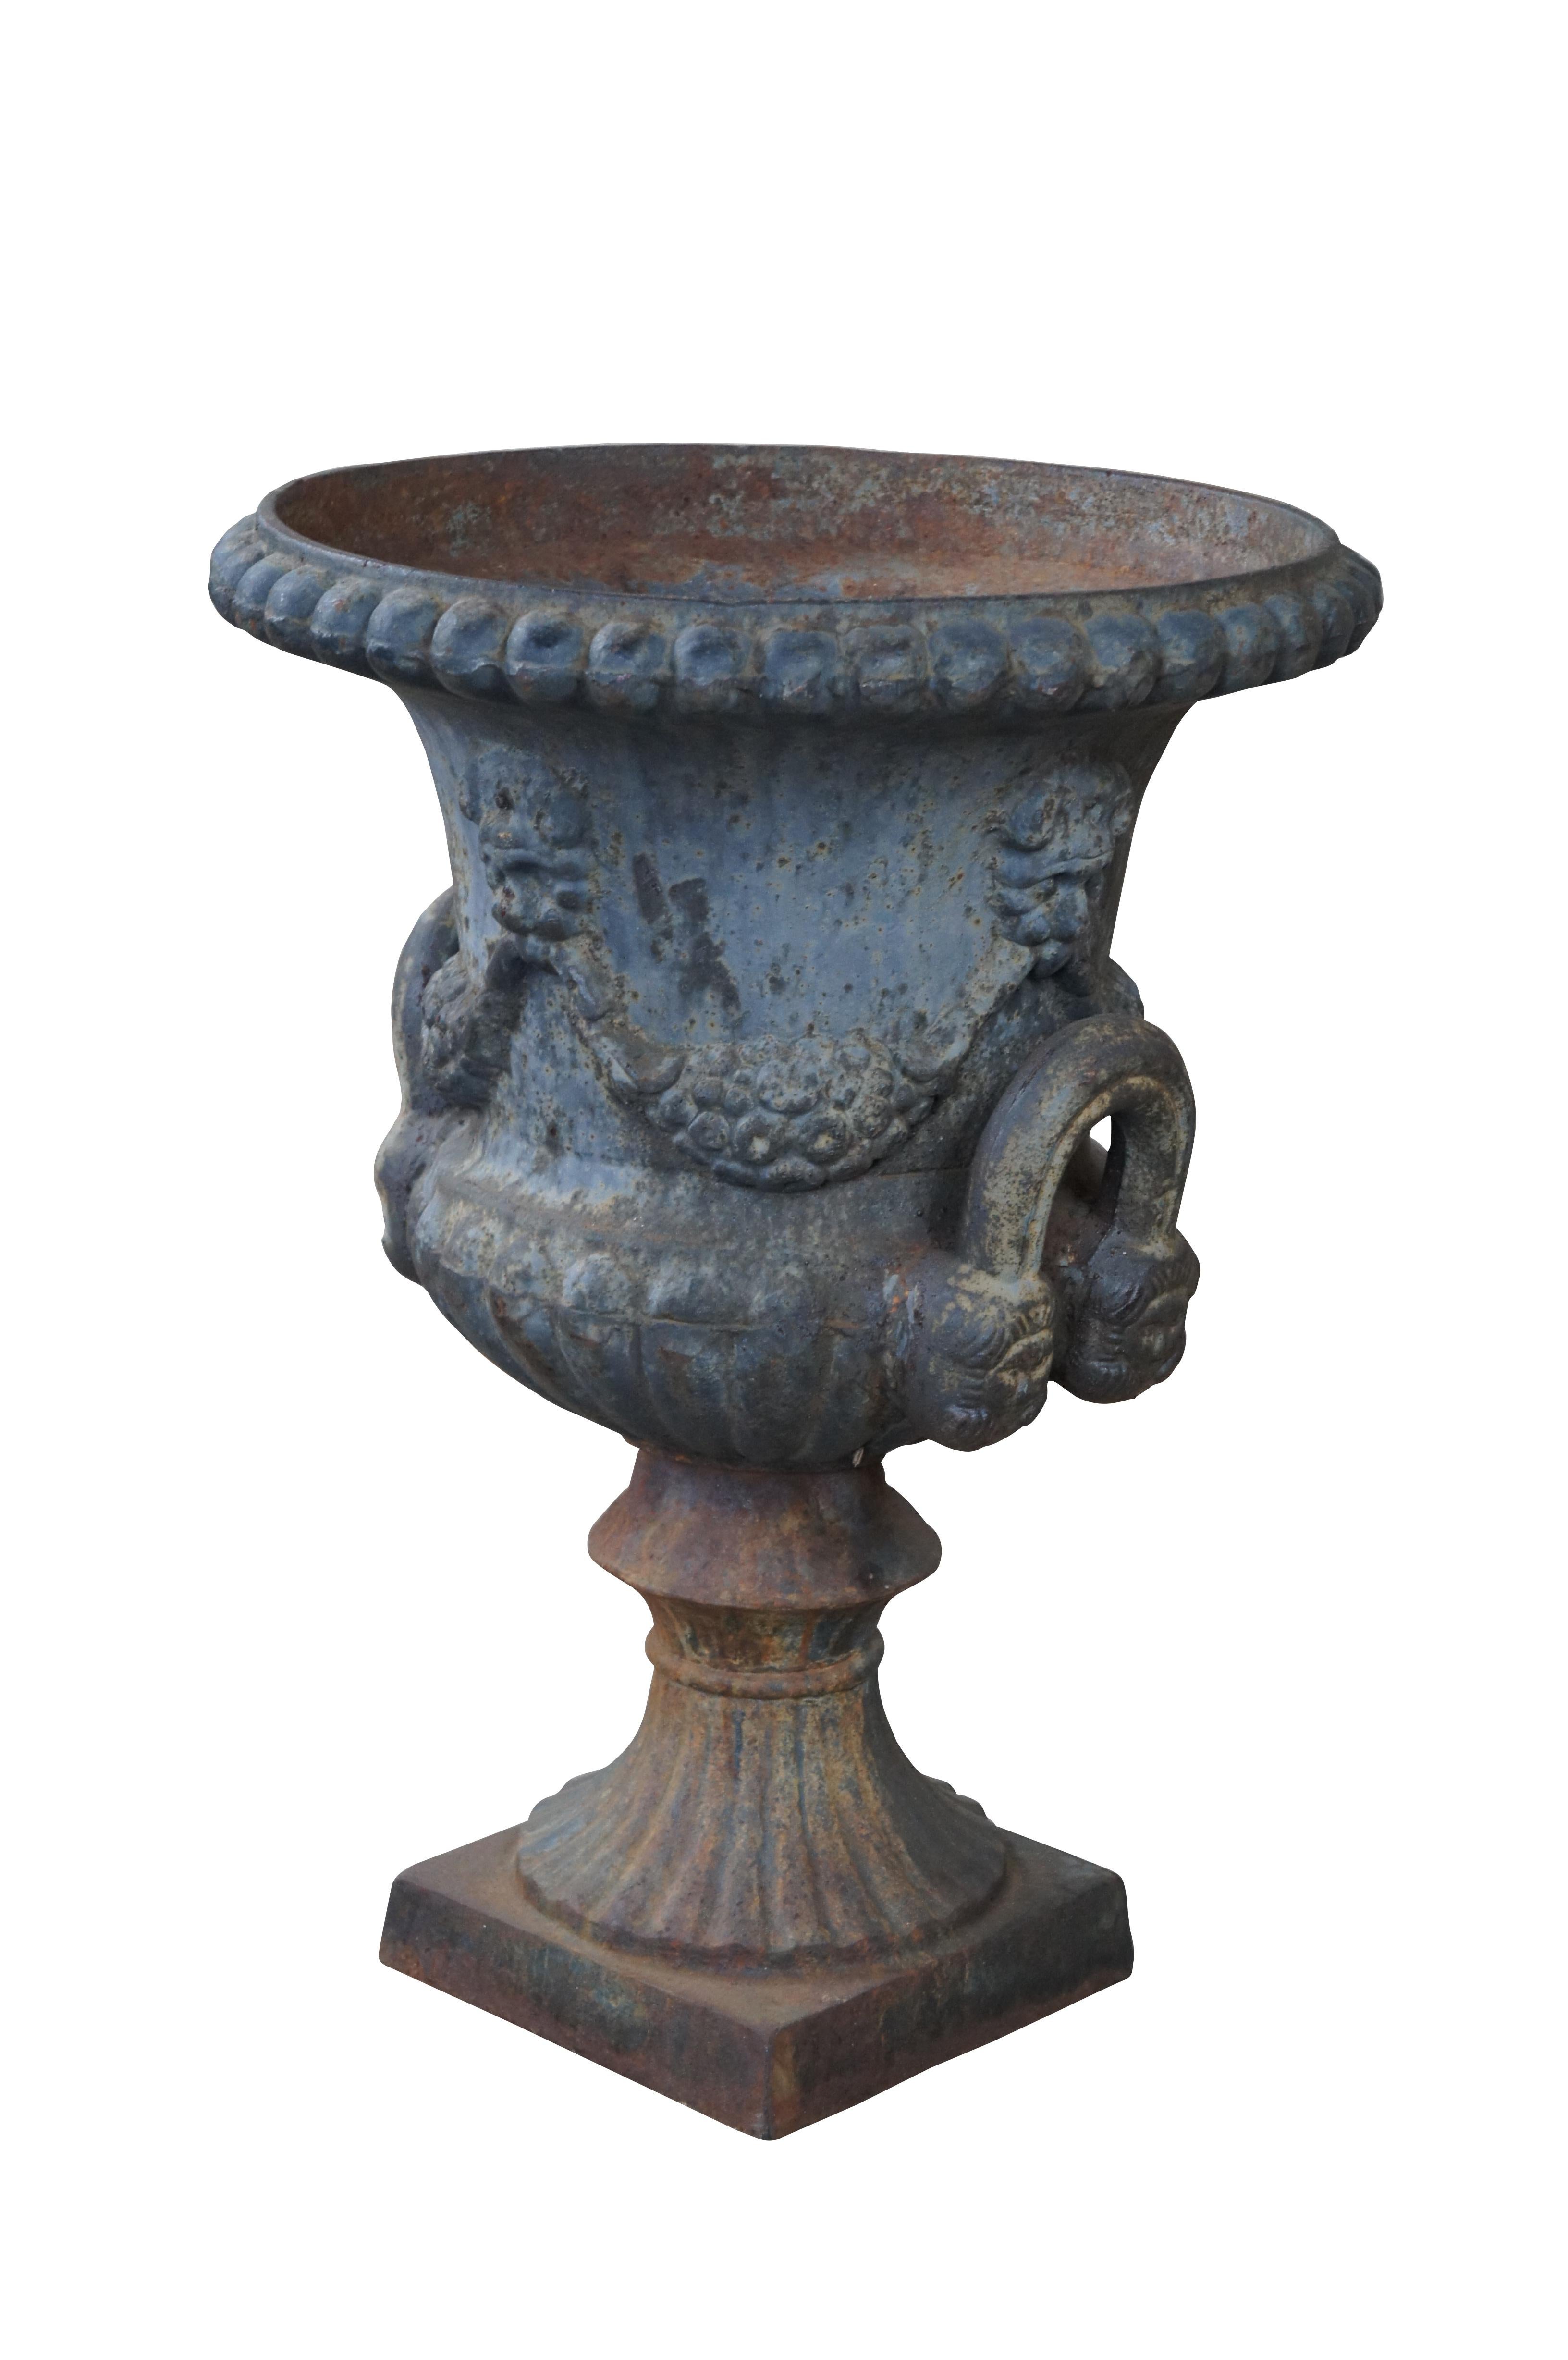 Large antique classical Grecian style urn. Made from cast iron with a flared and ribbed mouth over a grape decorated body with large handles leading to a fluted bottom over a plinth base.

Dimensions:
17